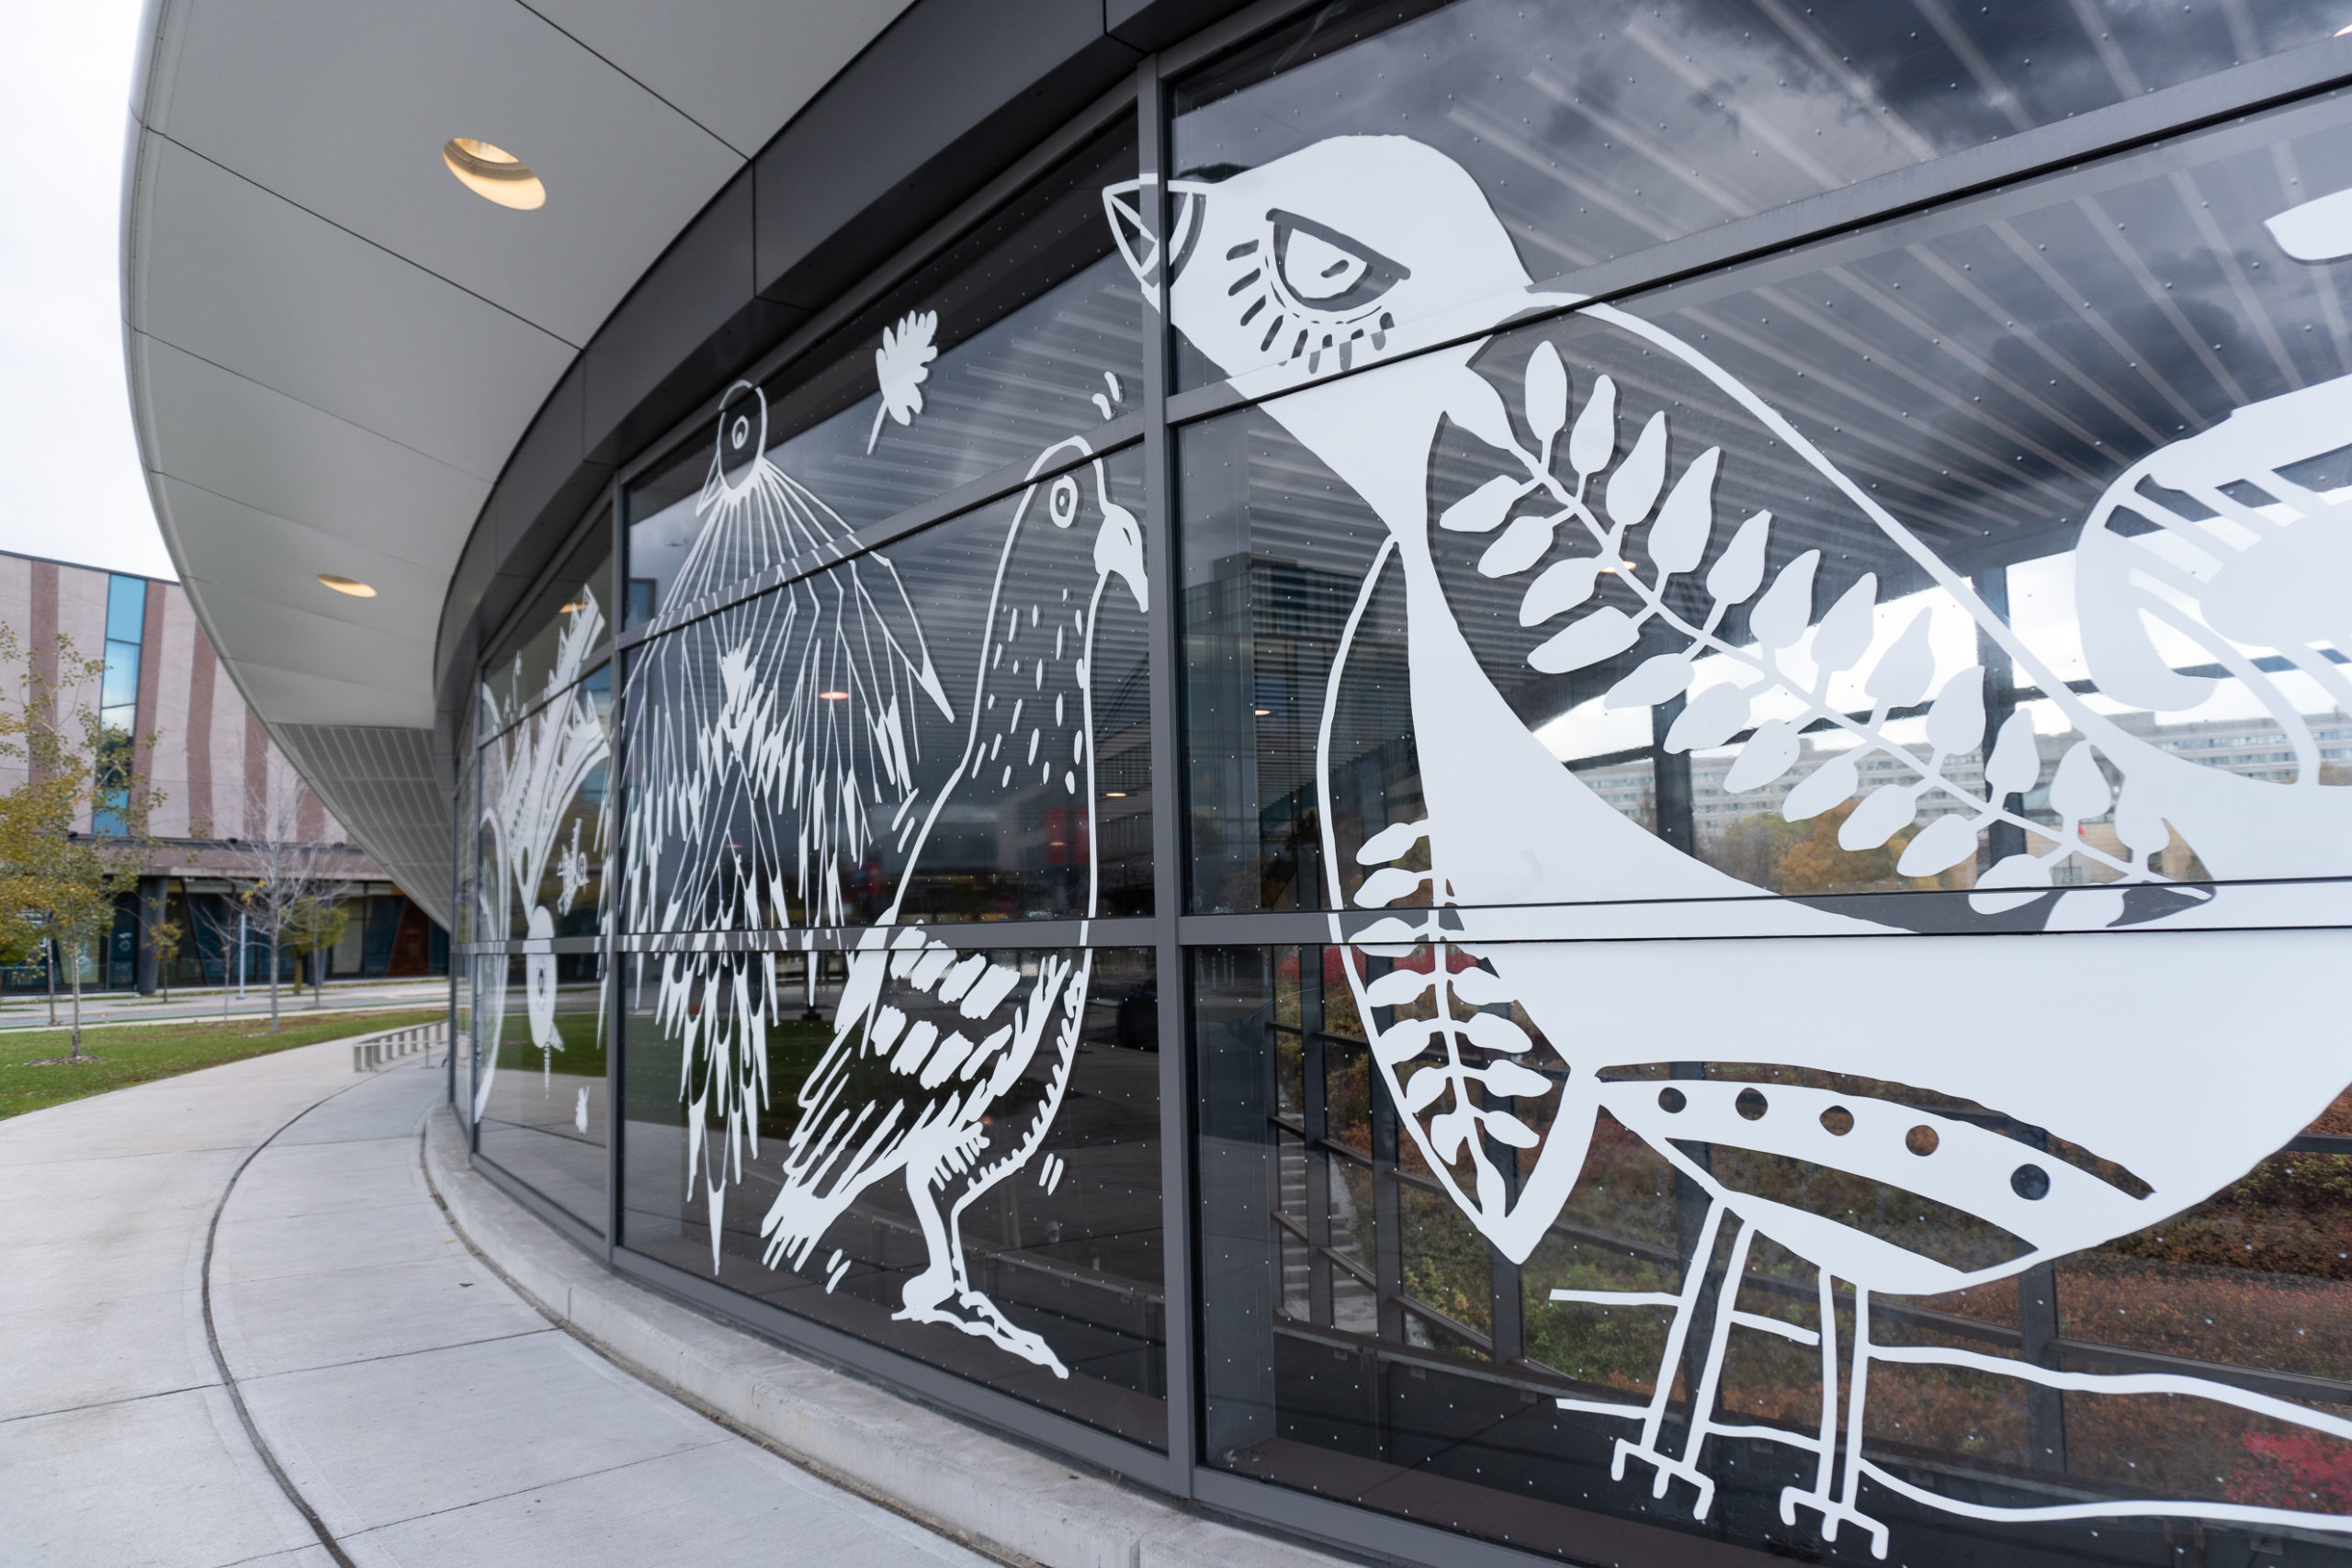 A large scale white vinyl window mural on a subway station building. The mural is the height of the glass windows and includes imagery of different birds